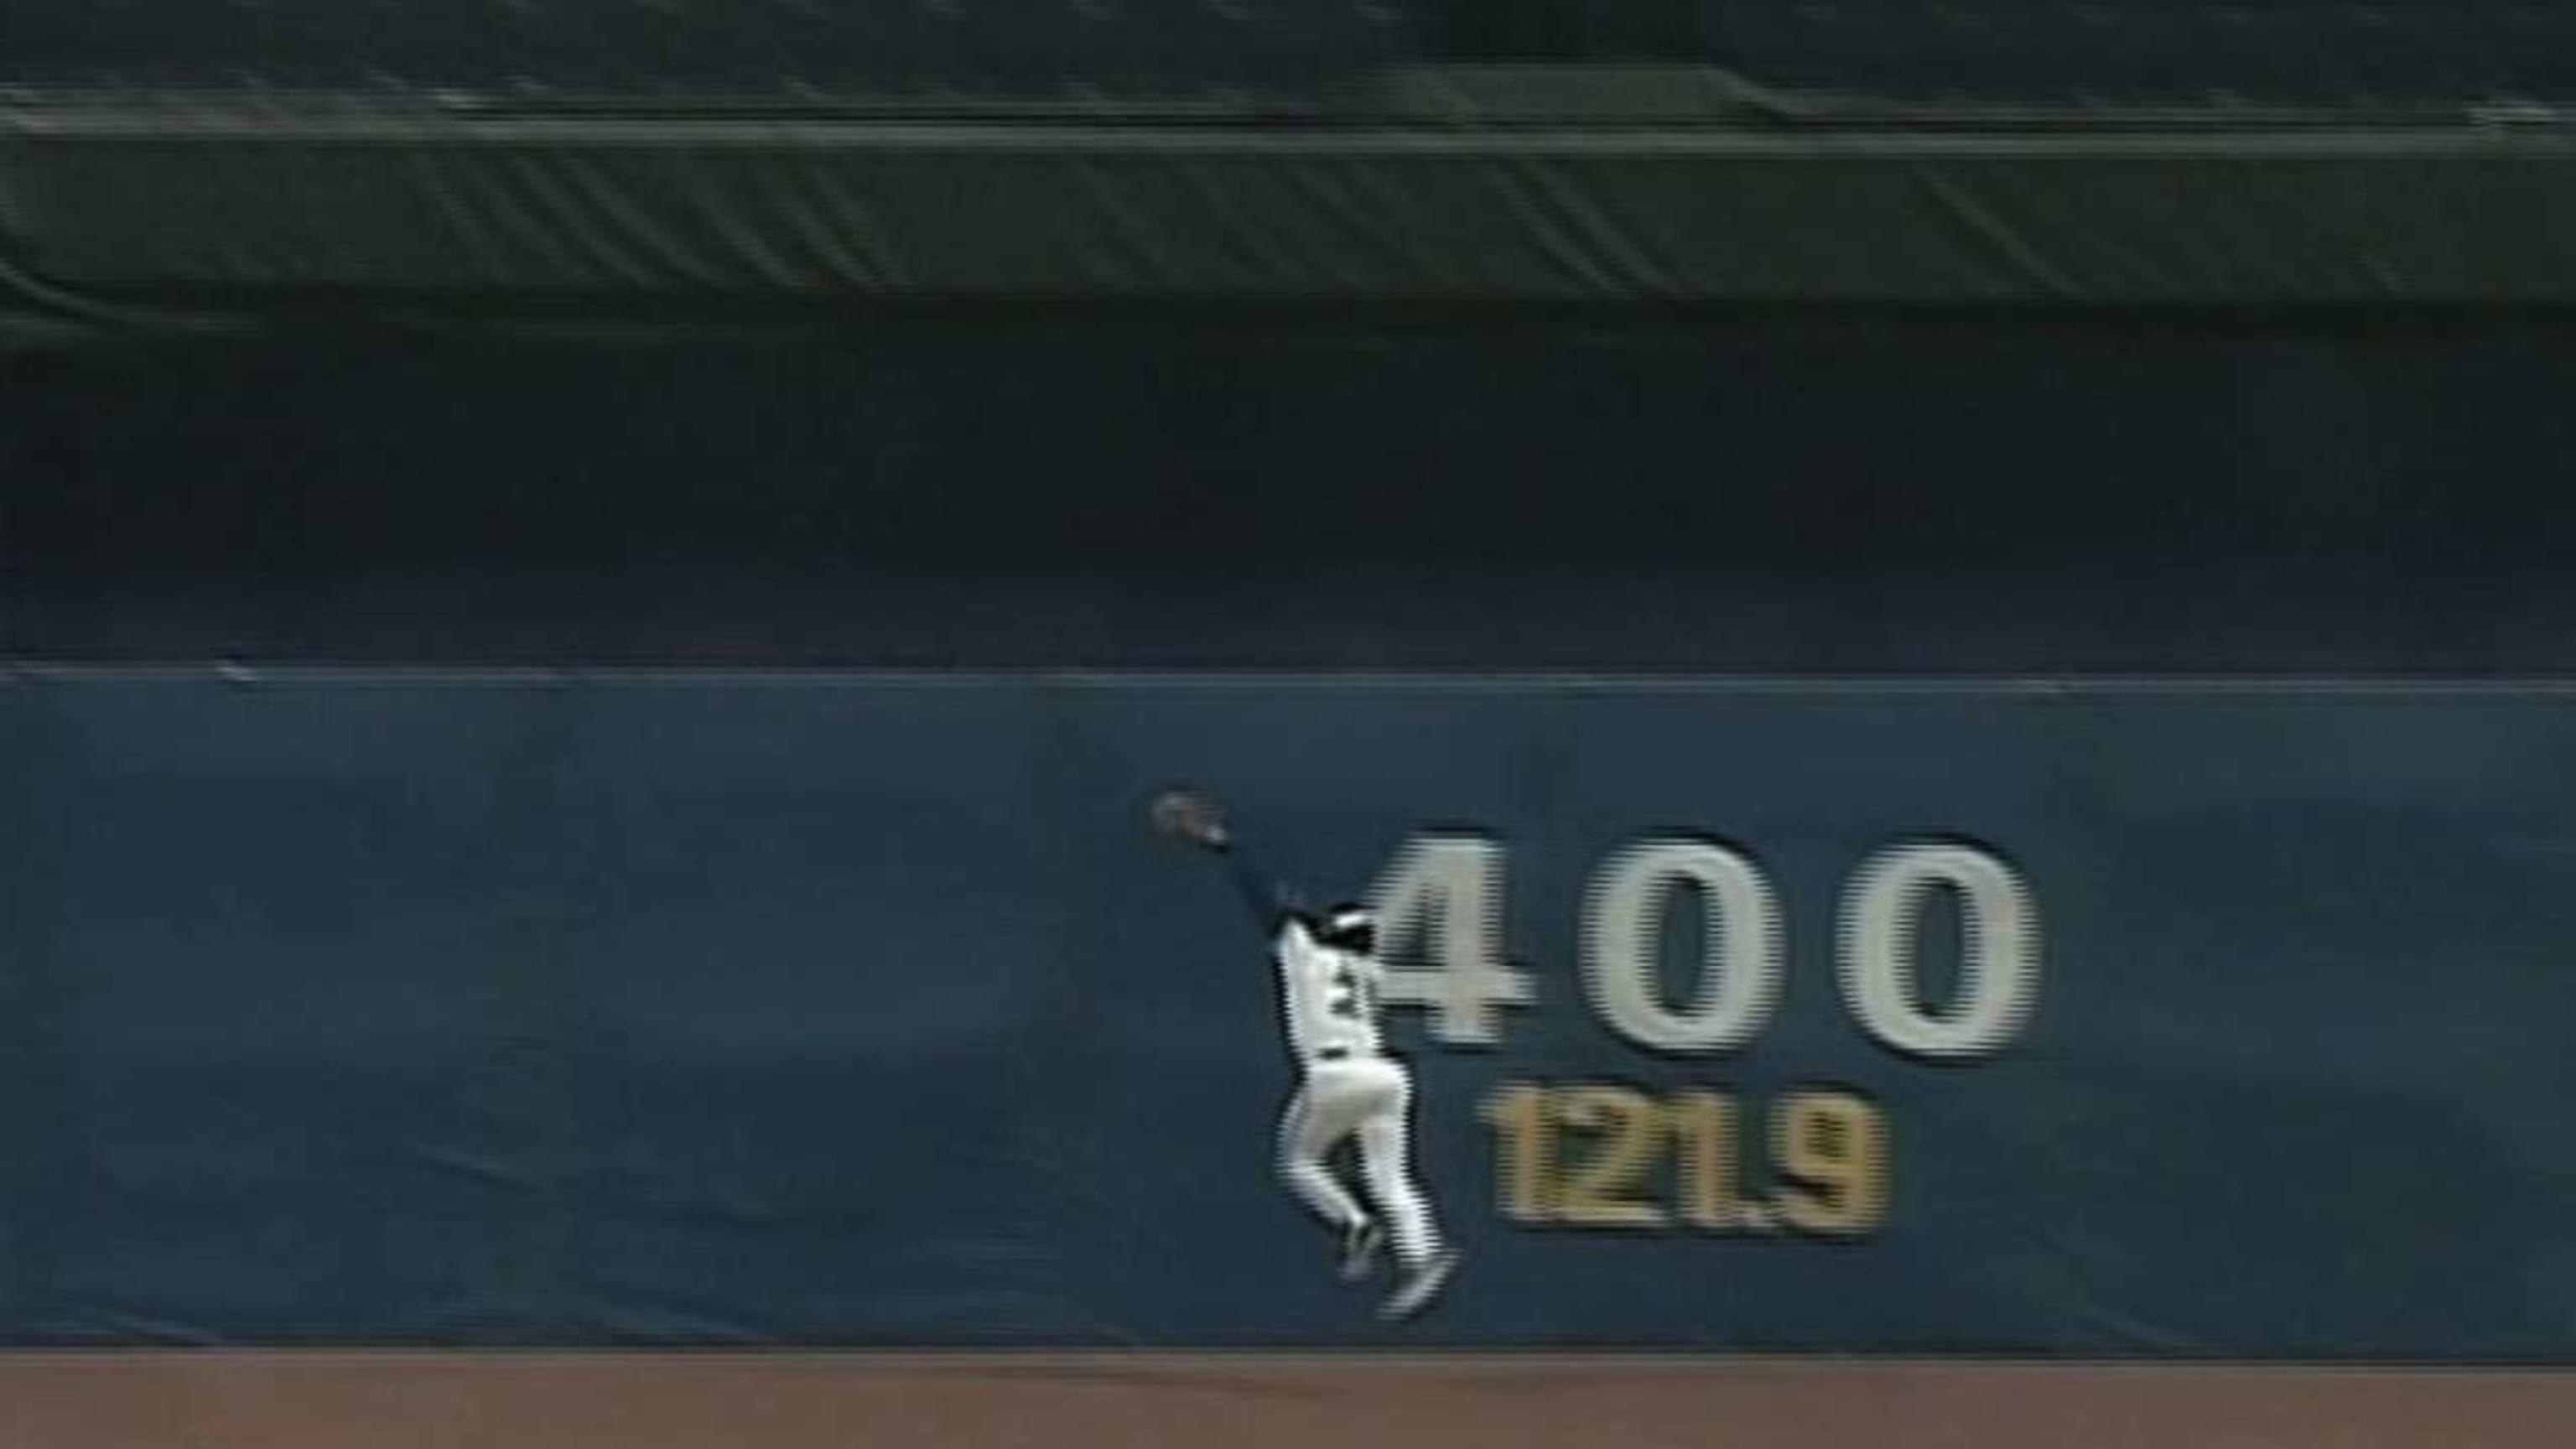 92 WS, GM 3: White's great catch